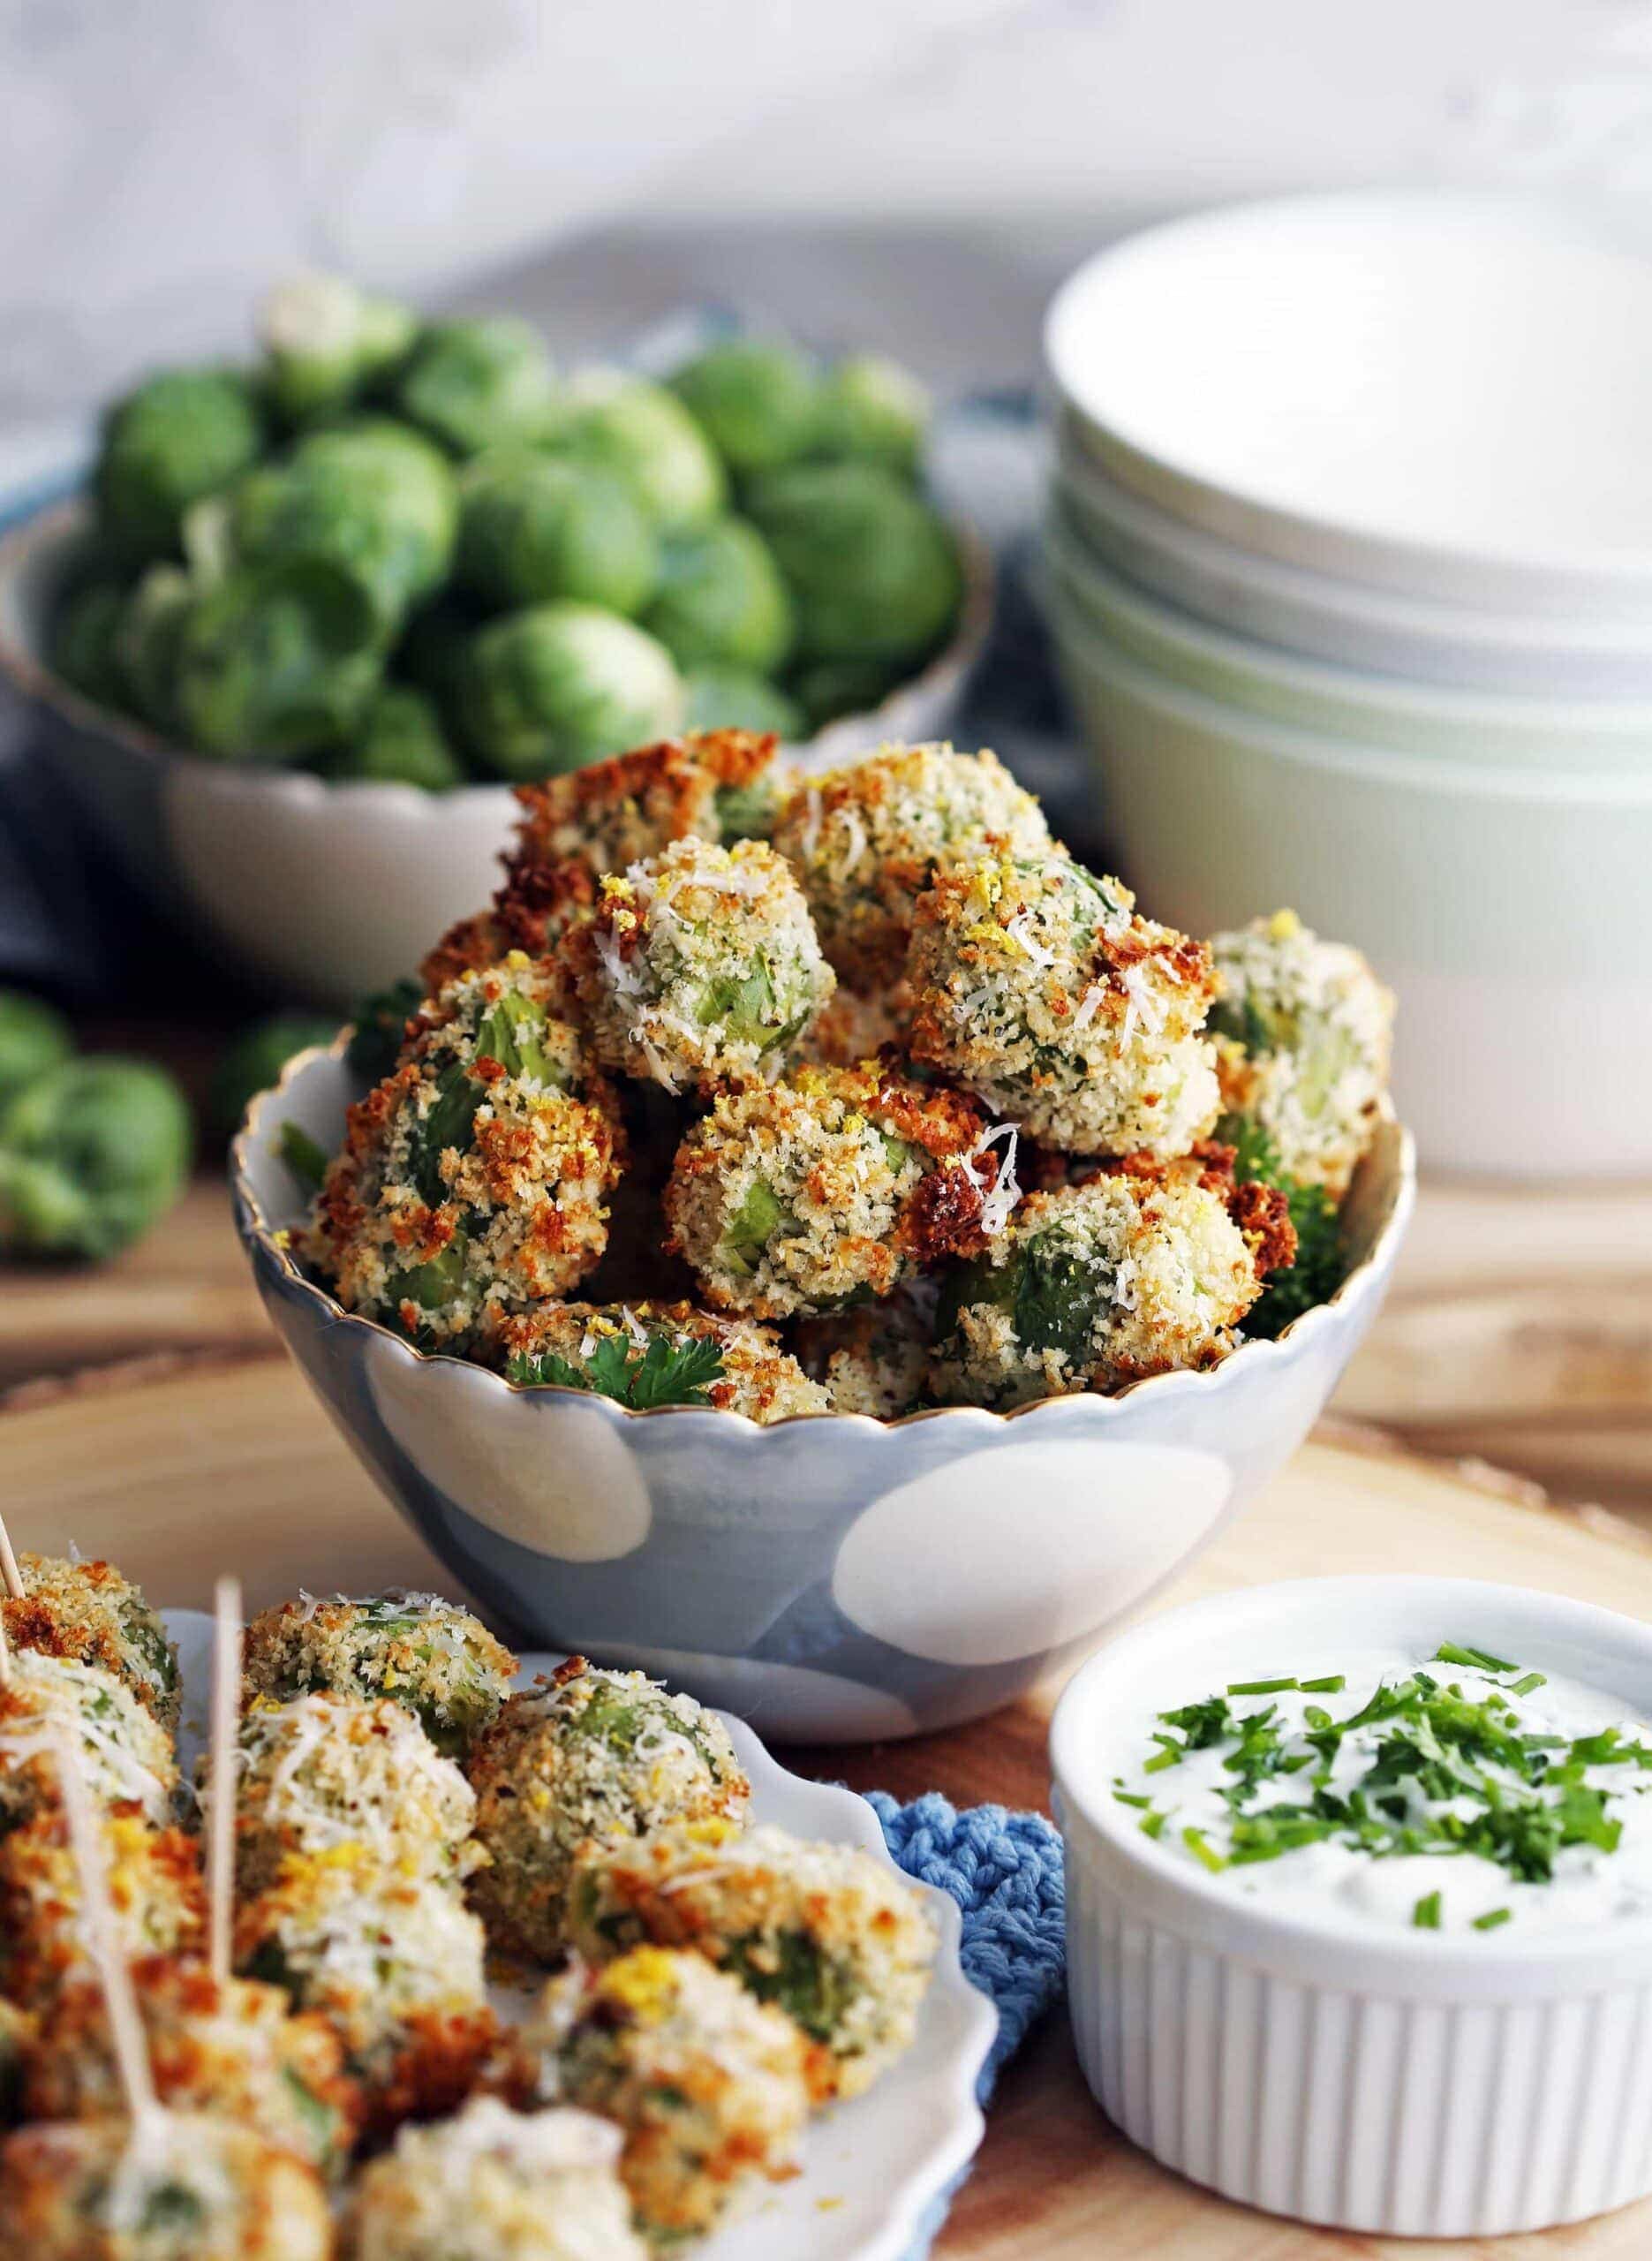 Parmesan Brussels Sprouts with Sour Cream Herb Dip